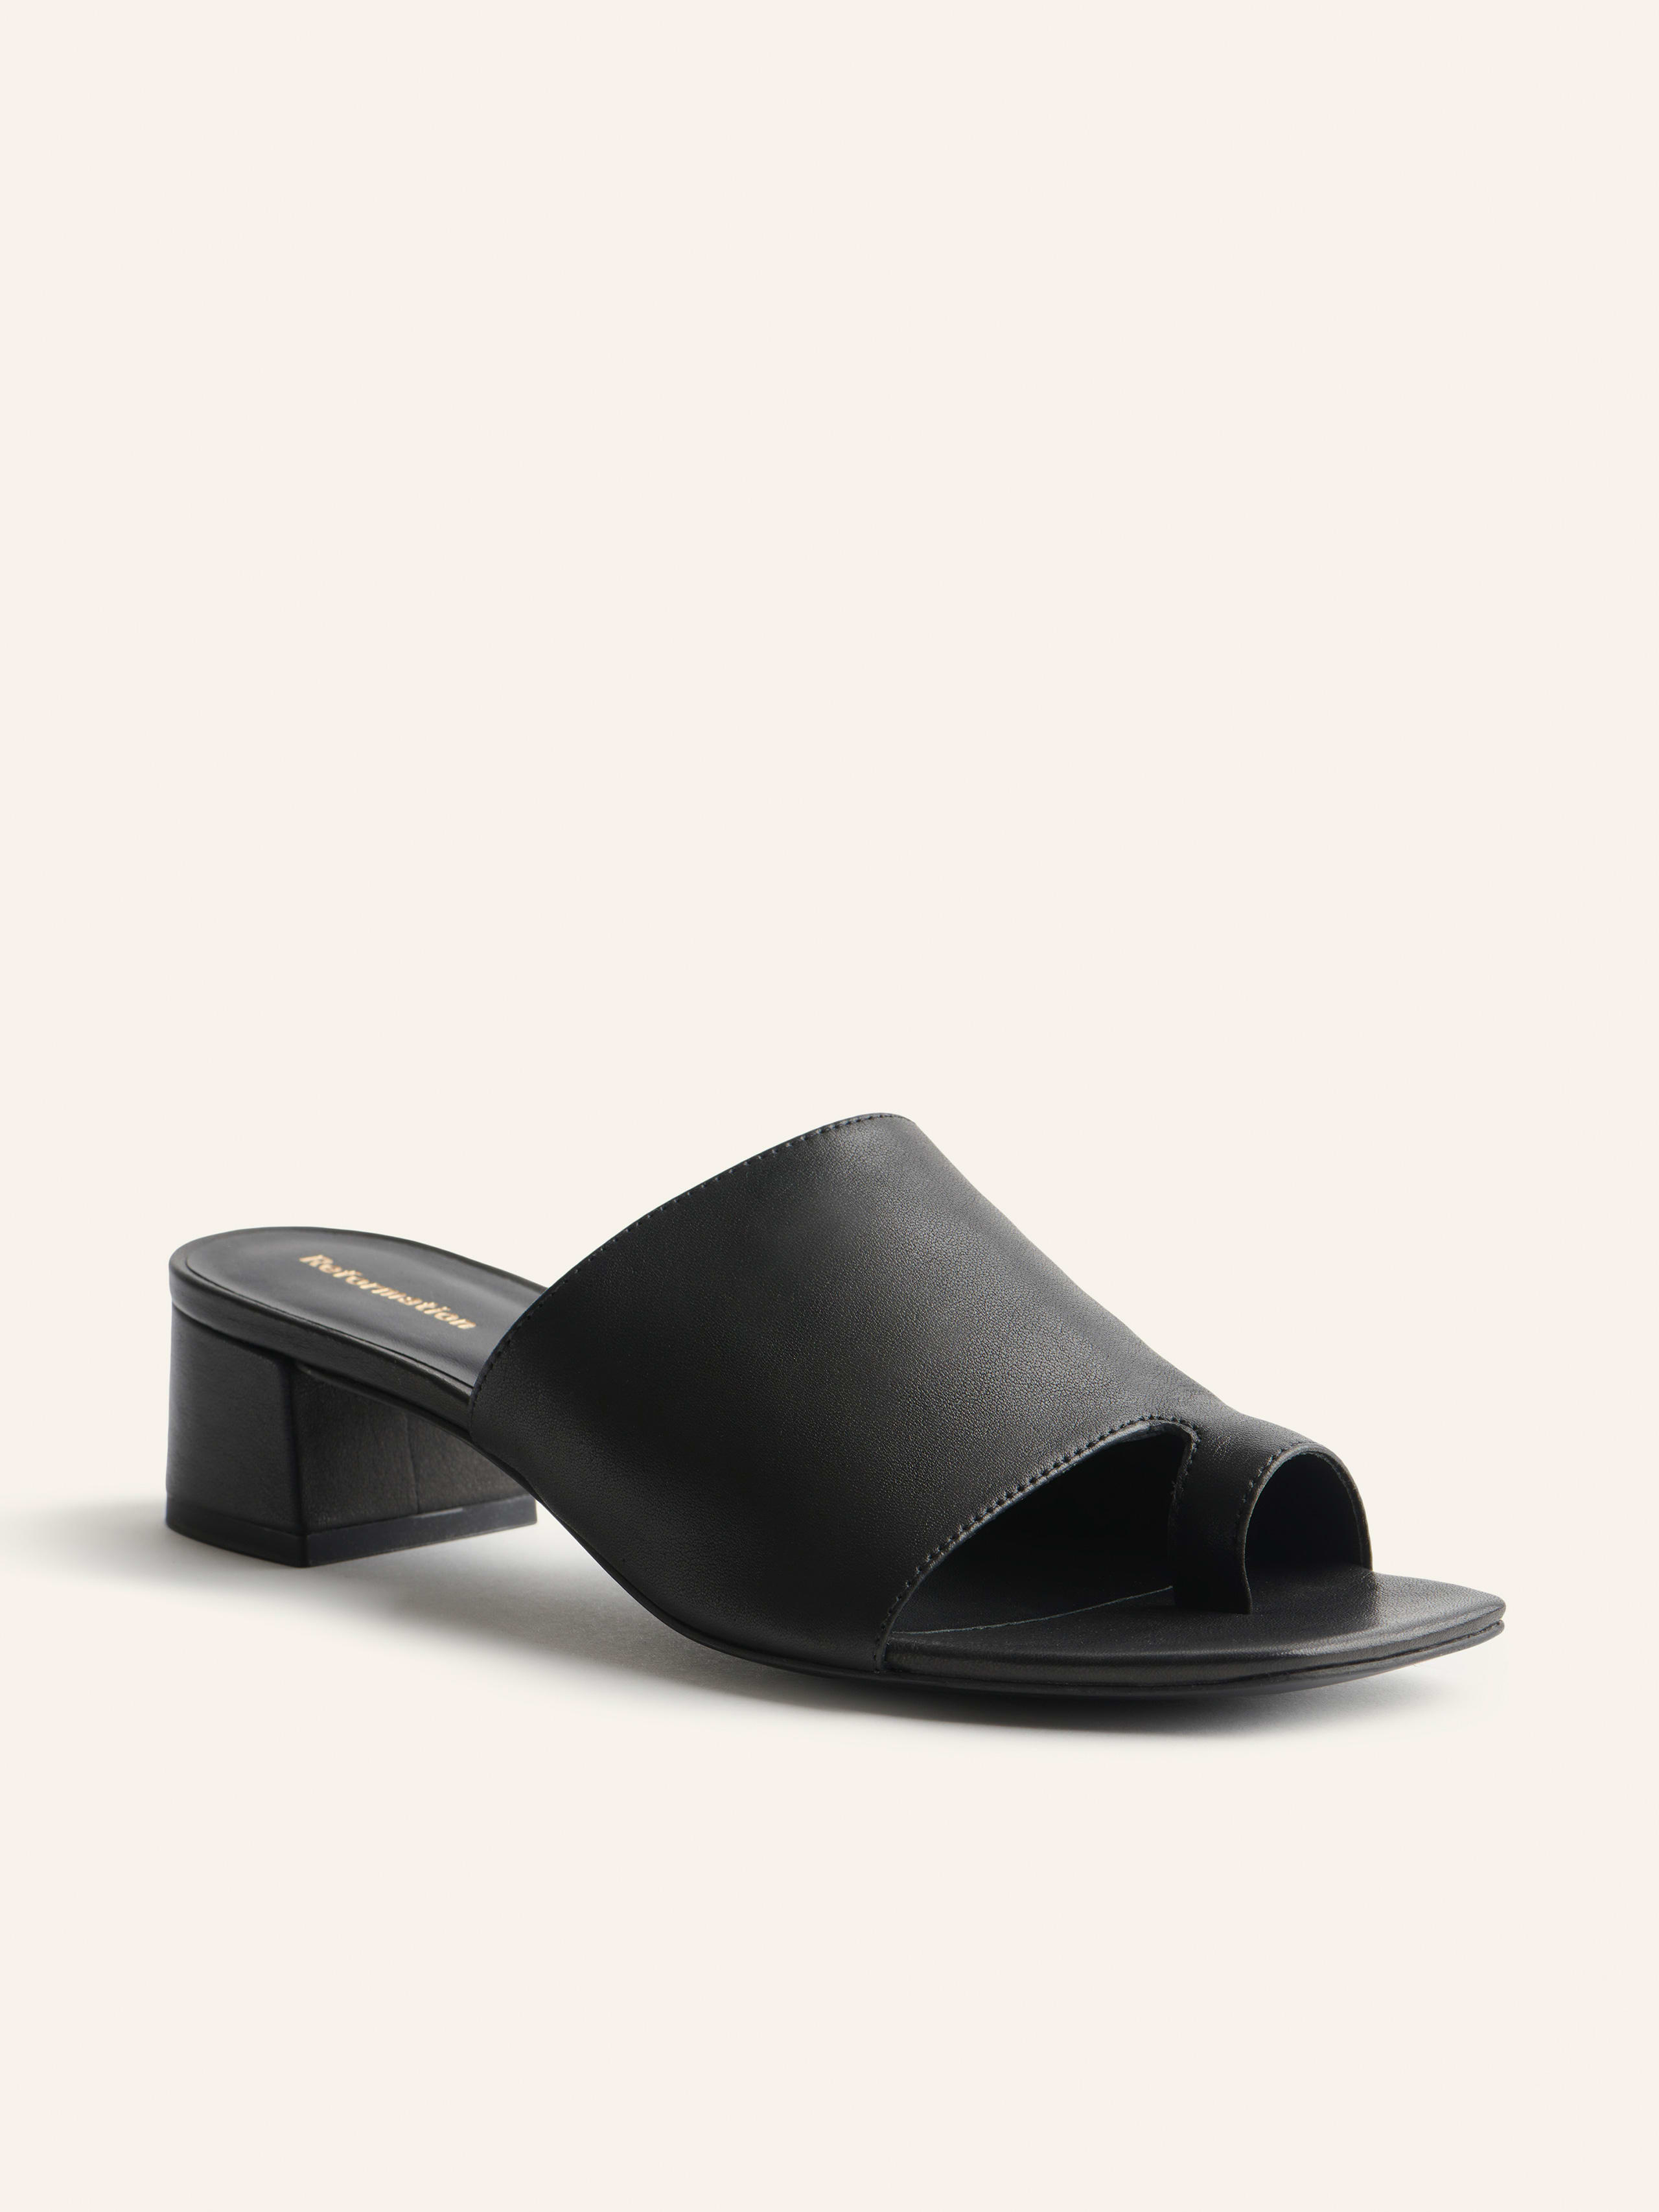 Diana Cutout Block Heel Sandal - Leather Sustainable Shoes | Reformation